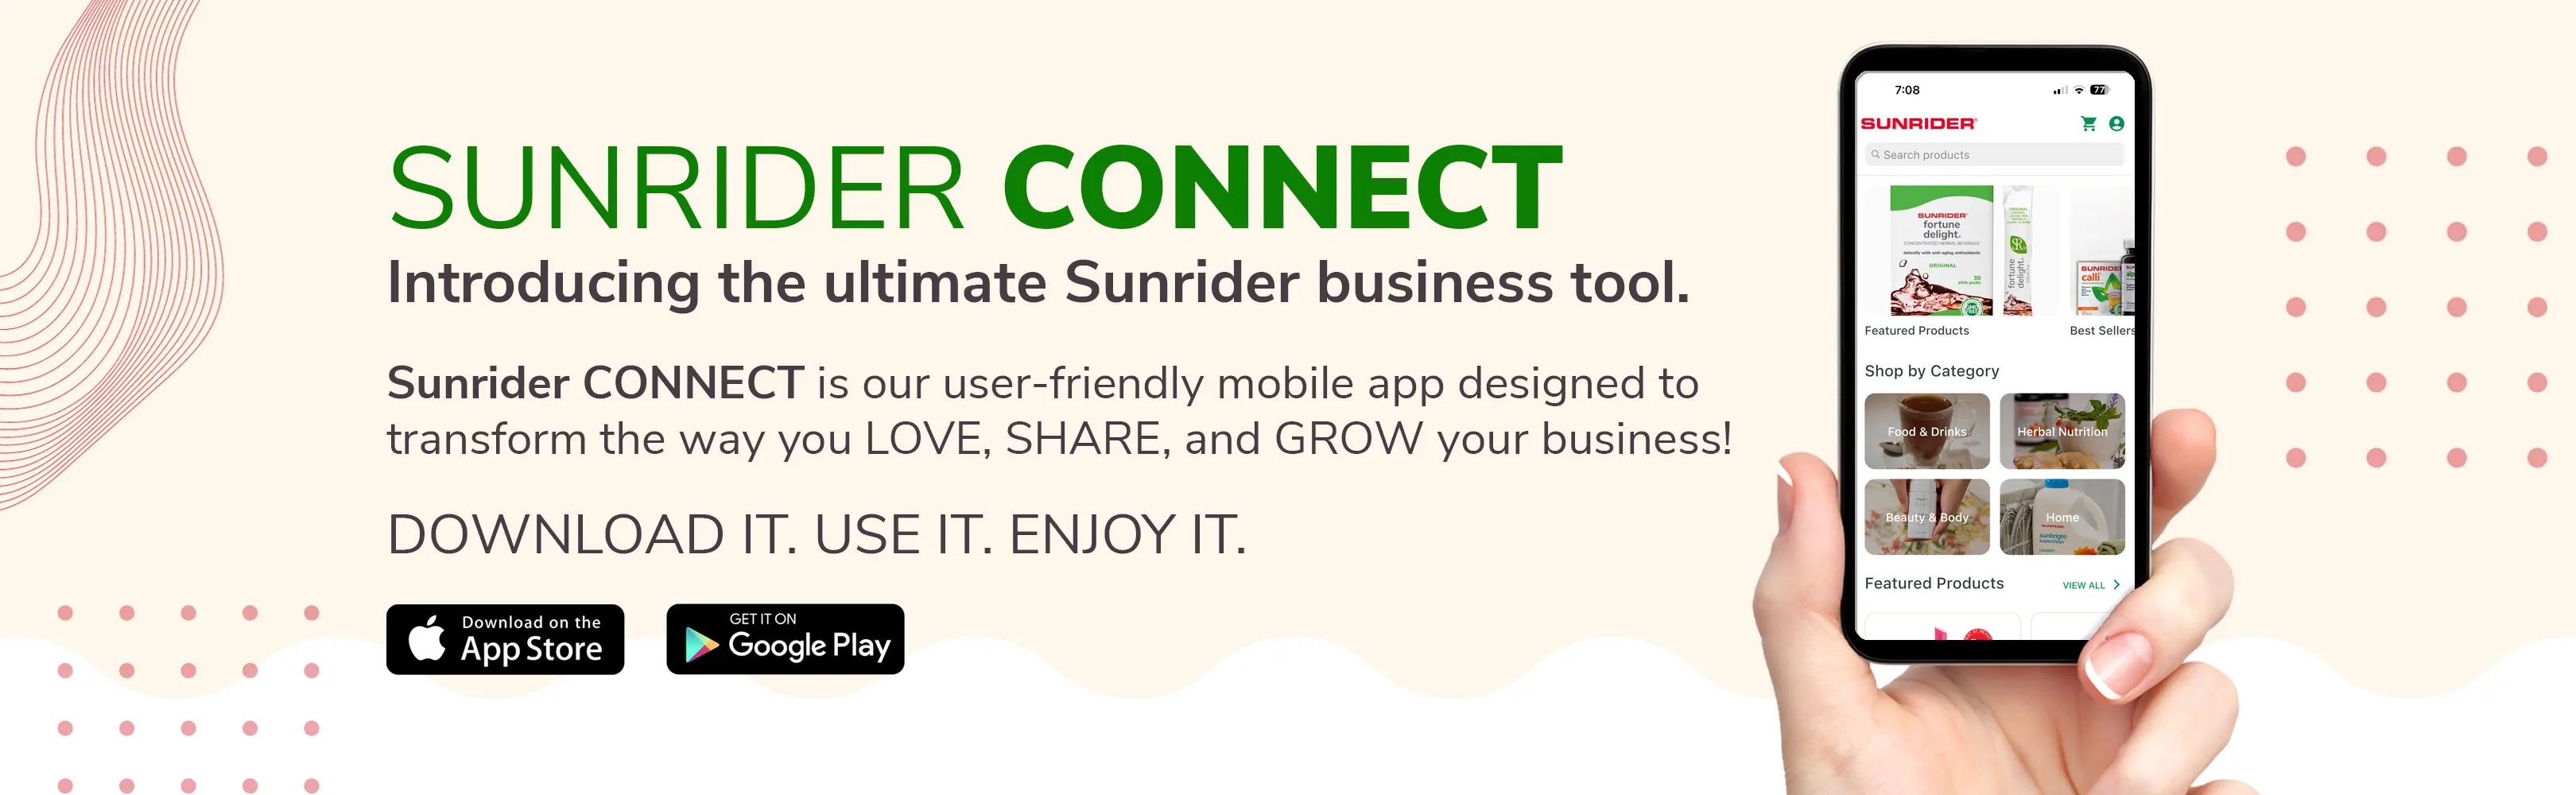 US-Sunrider-Connect-Carousel-ENG